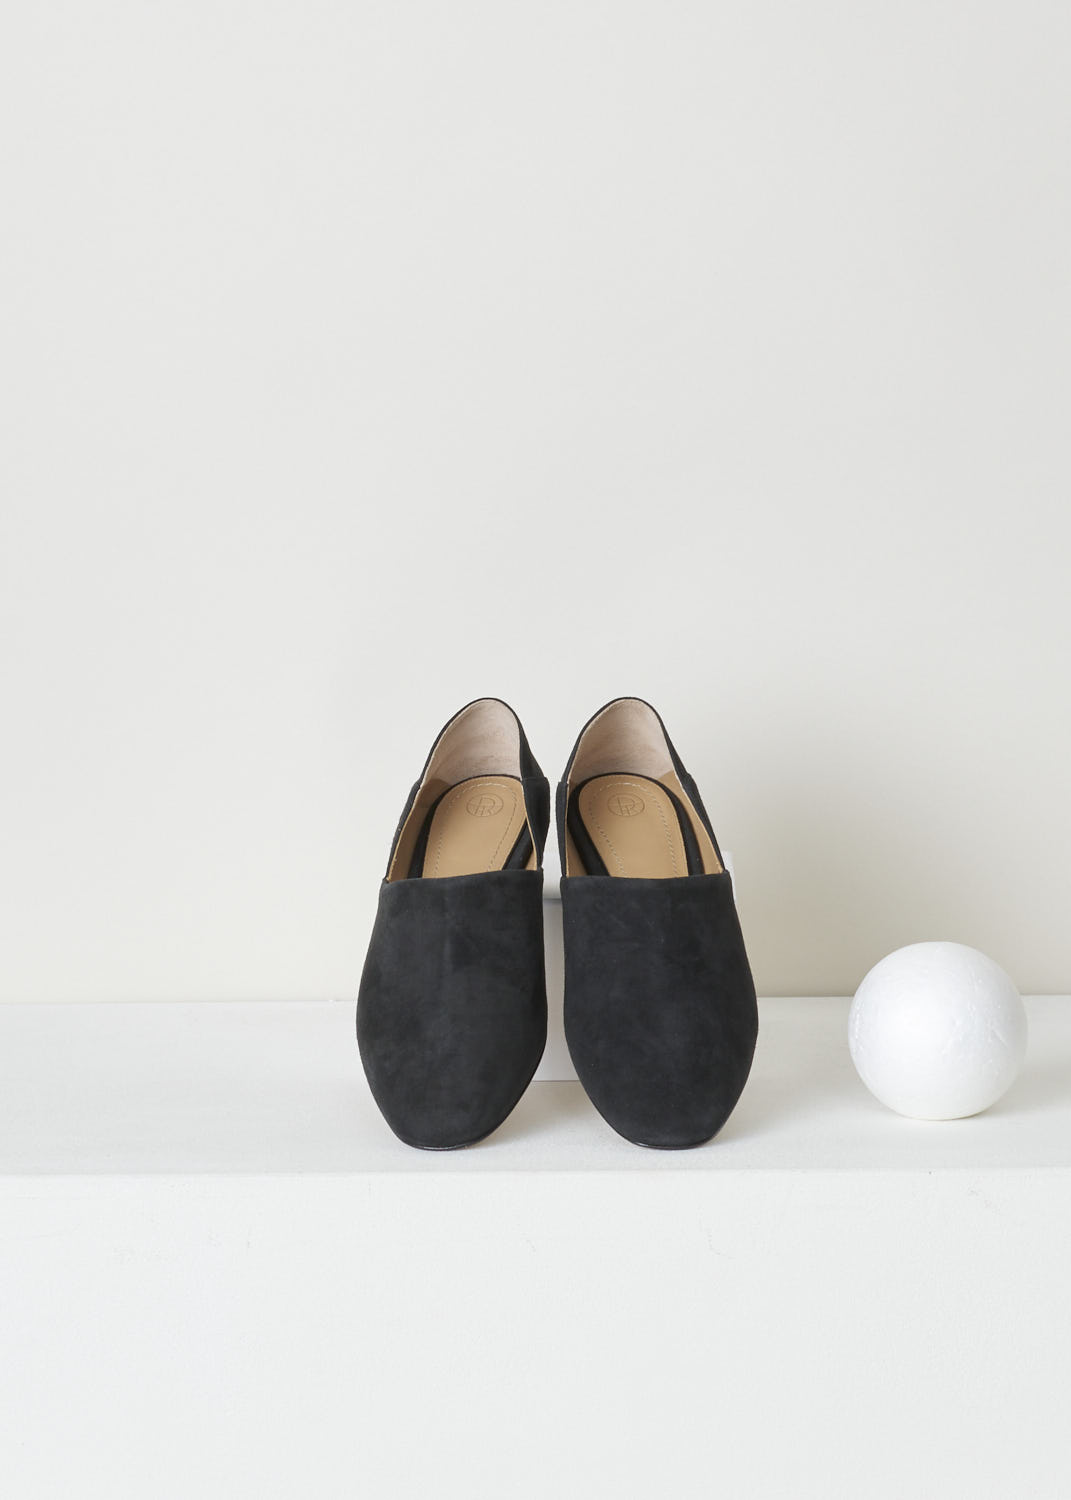 THE ROW, BLACK SUEDE SLIPPER, NOELLE_F1000_L25_BLK, Black, Top, Minimalistic black suede slipper. The slip-in model features a rounded toe vamp. The sober design is exactly what makes these shoes so beautiful.
